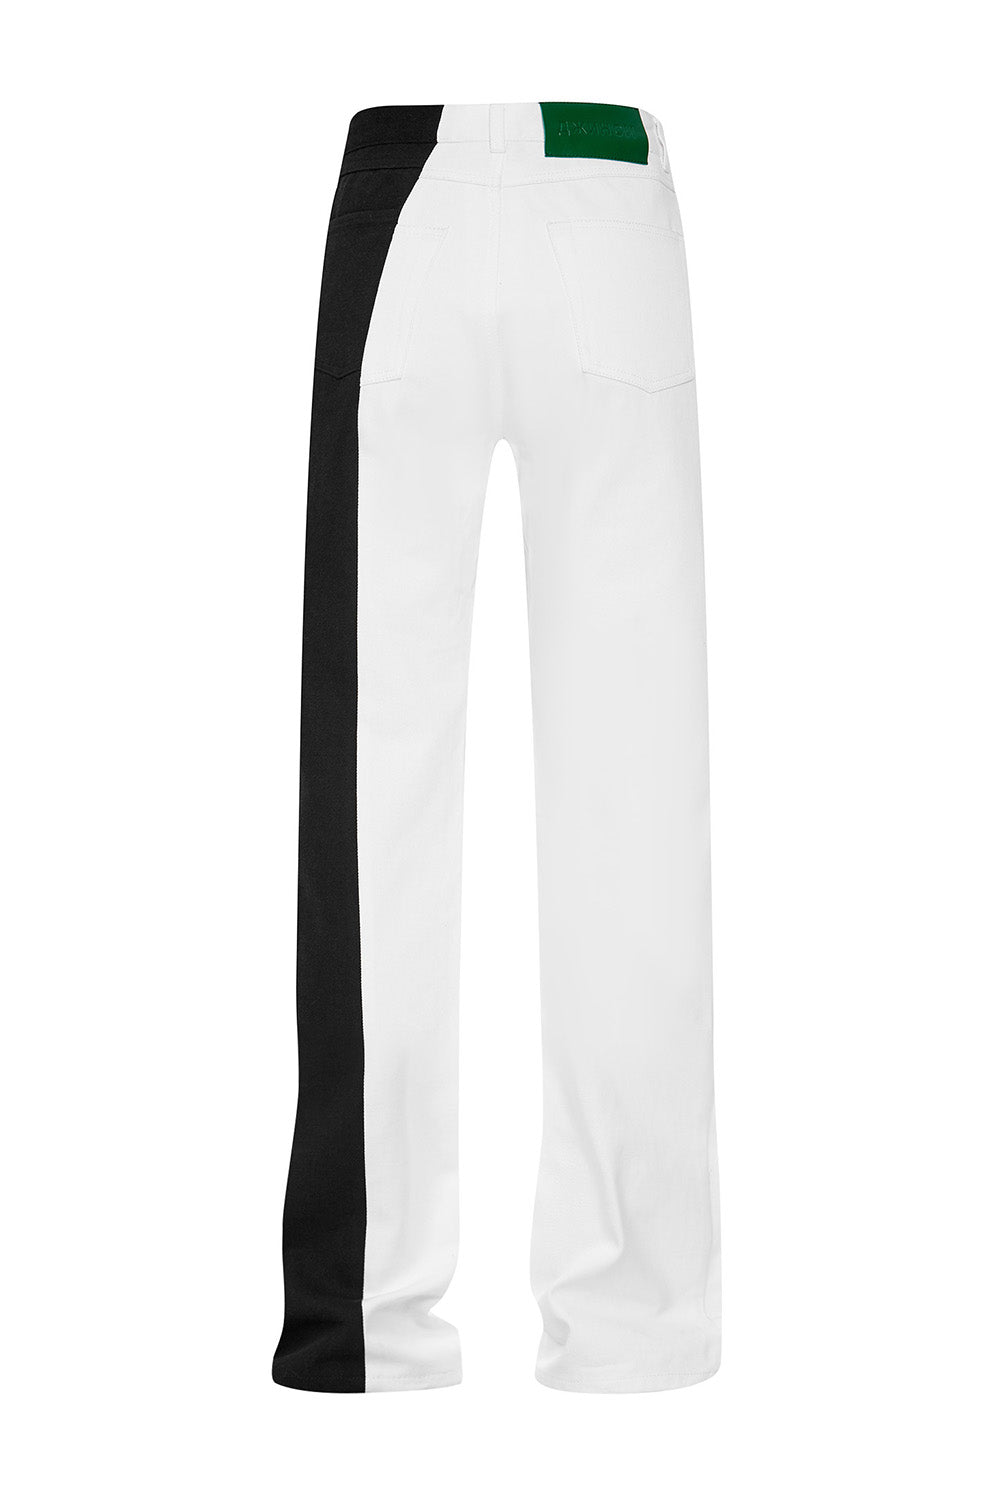 White Jeans with Black Strap